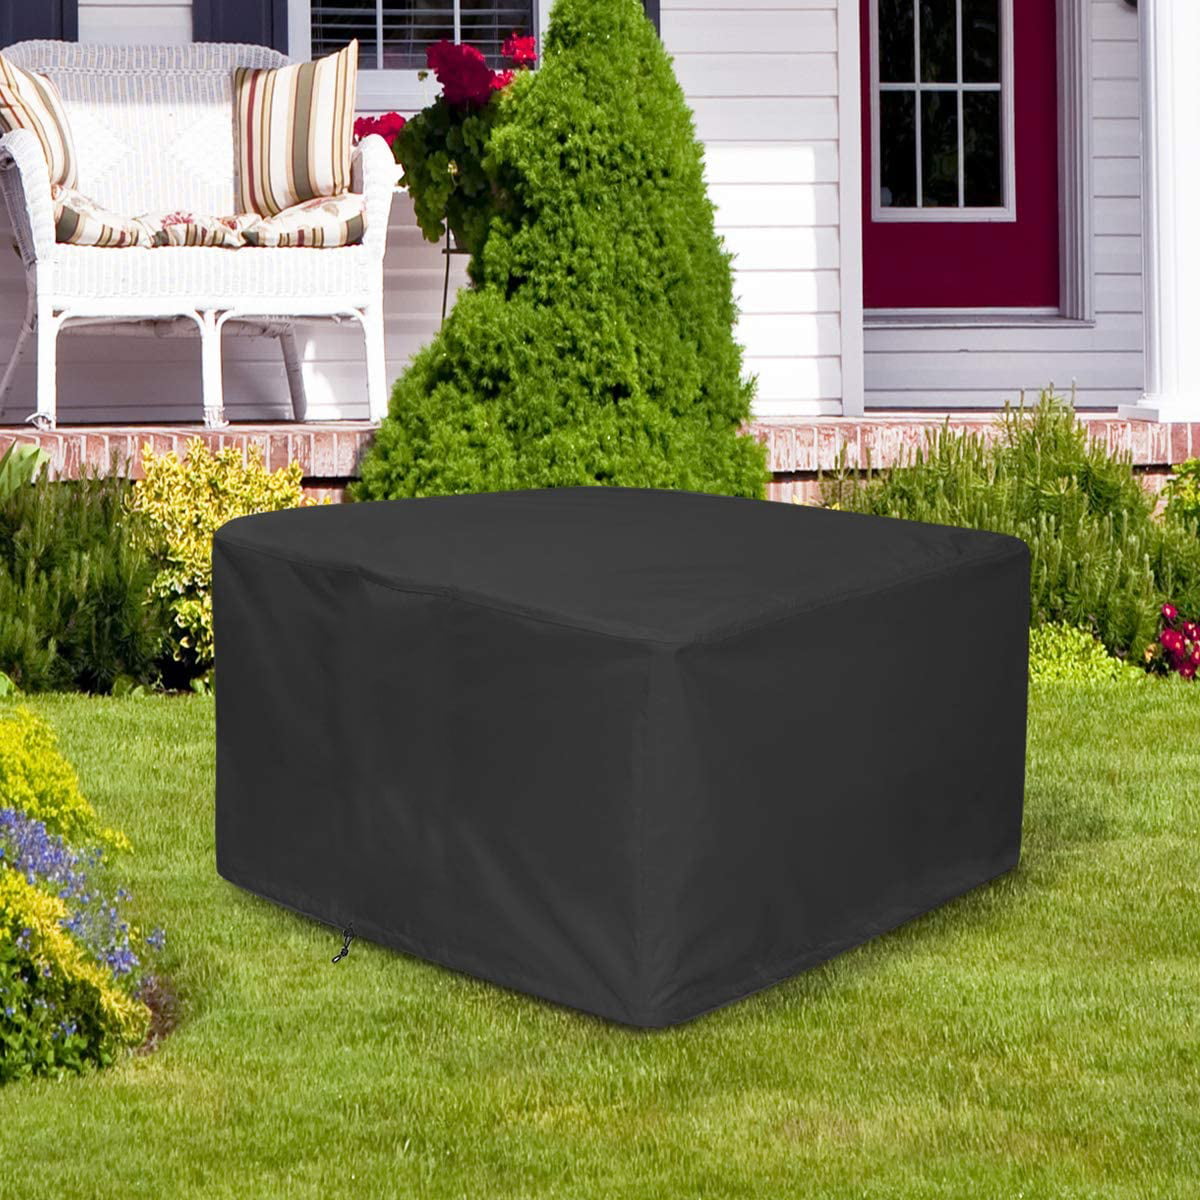 44" Square Gas Fire Pit Cover 210D Fabric Coating Patio Durable Outdoor Cover 